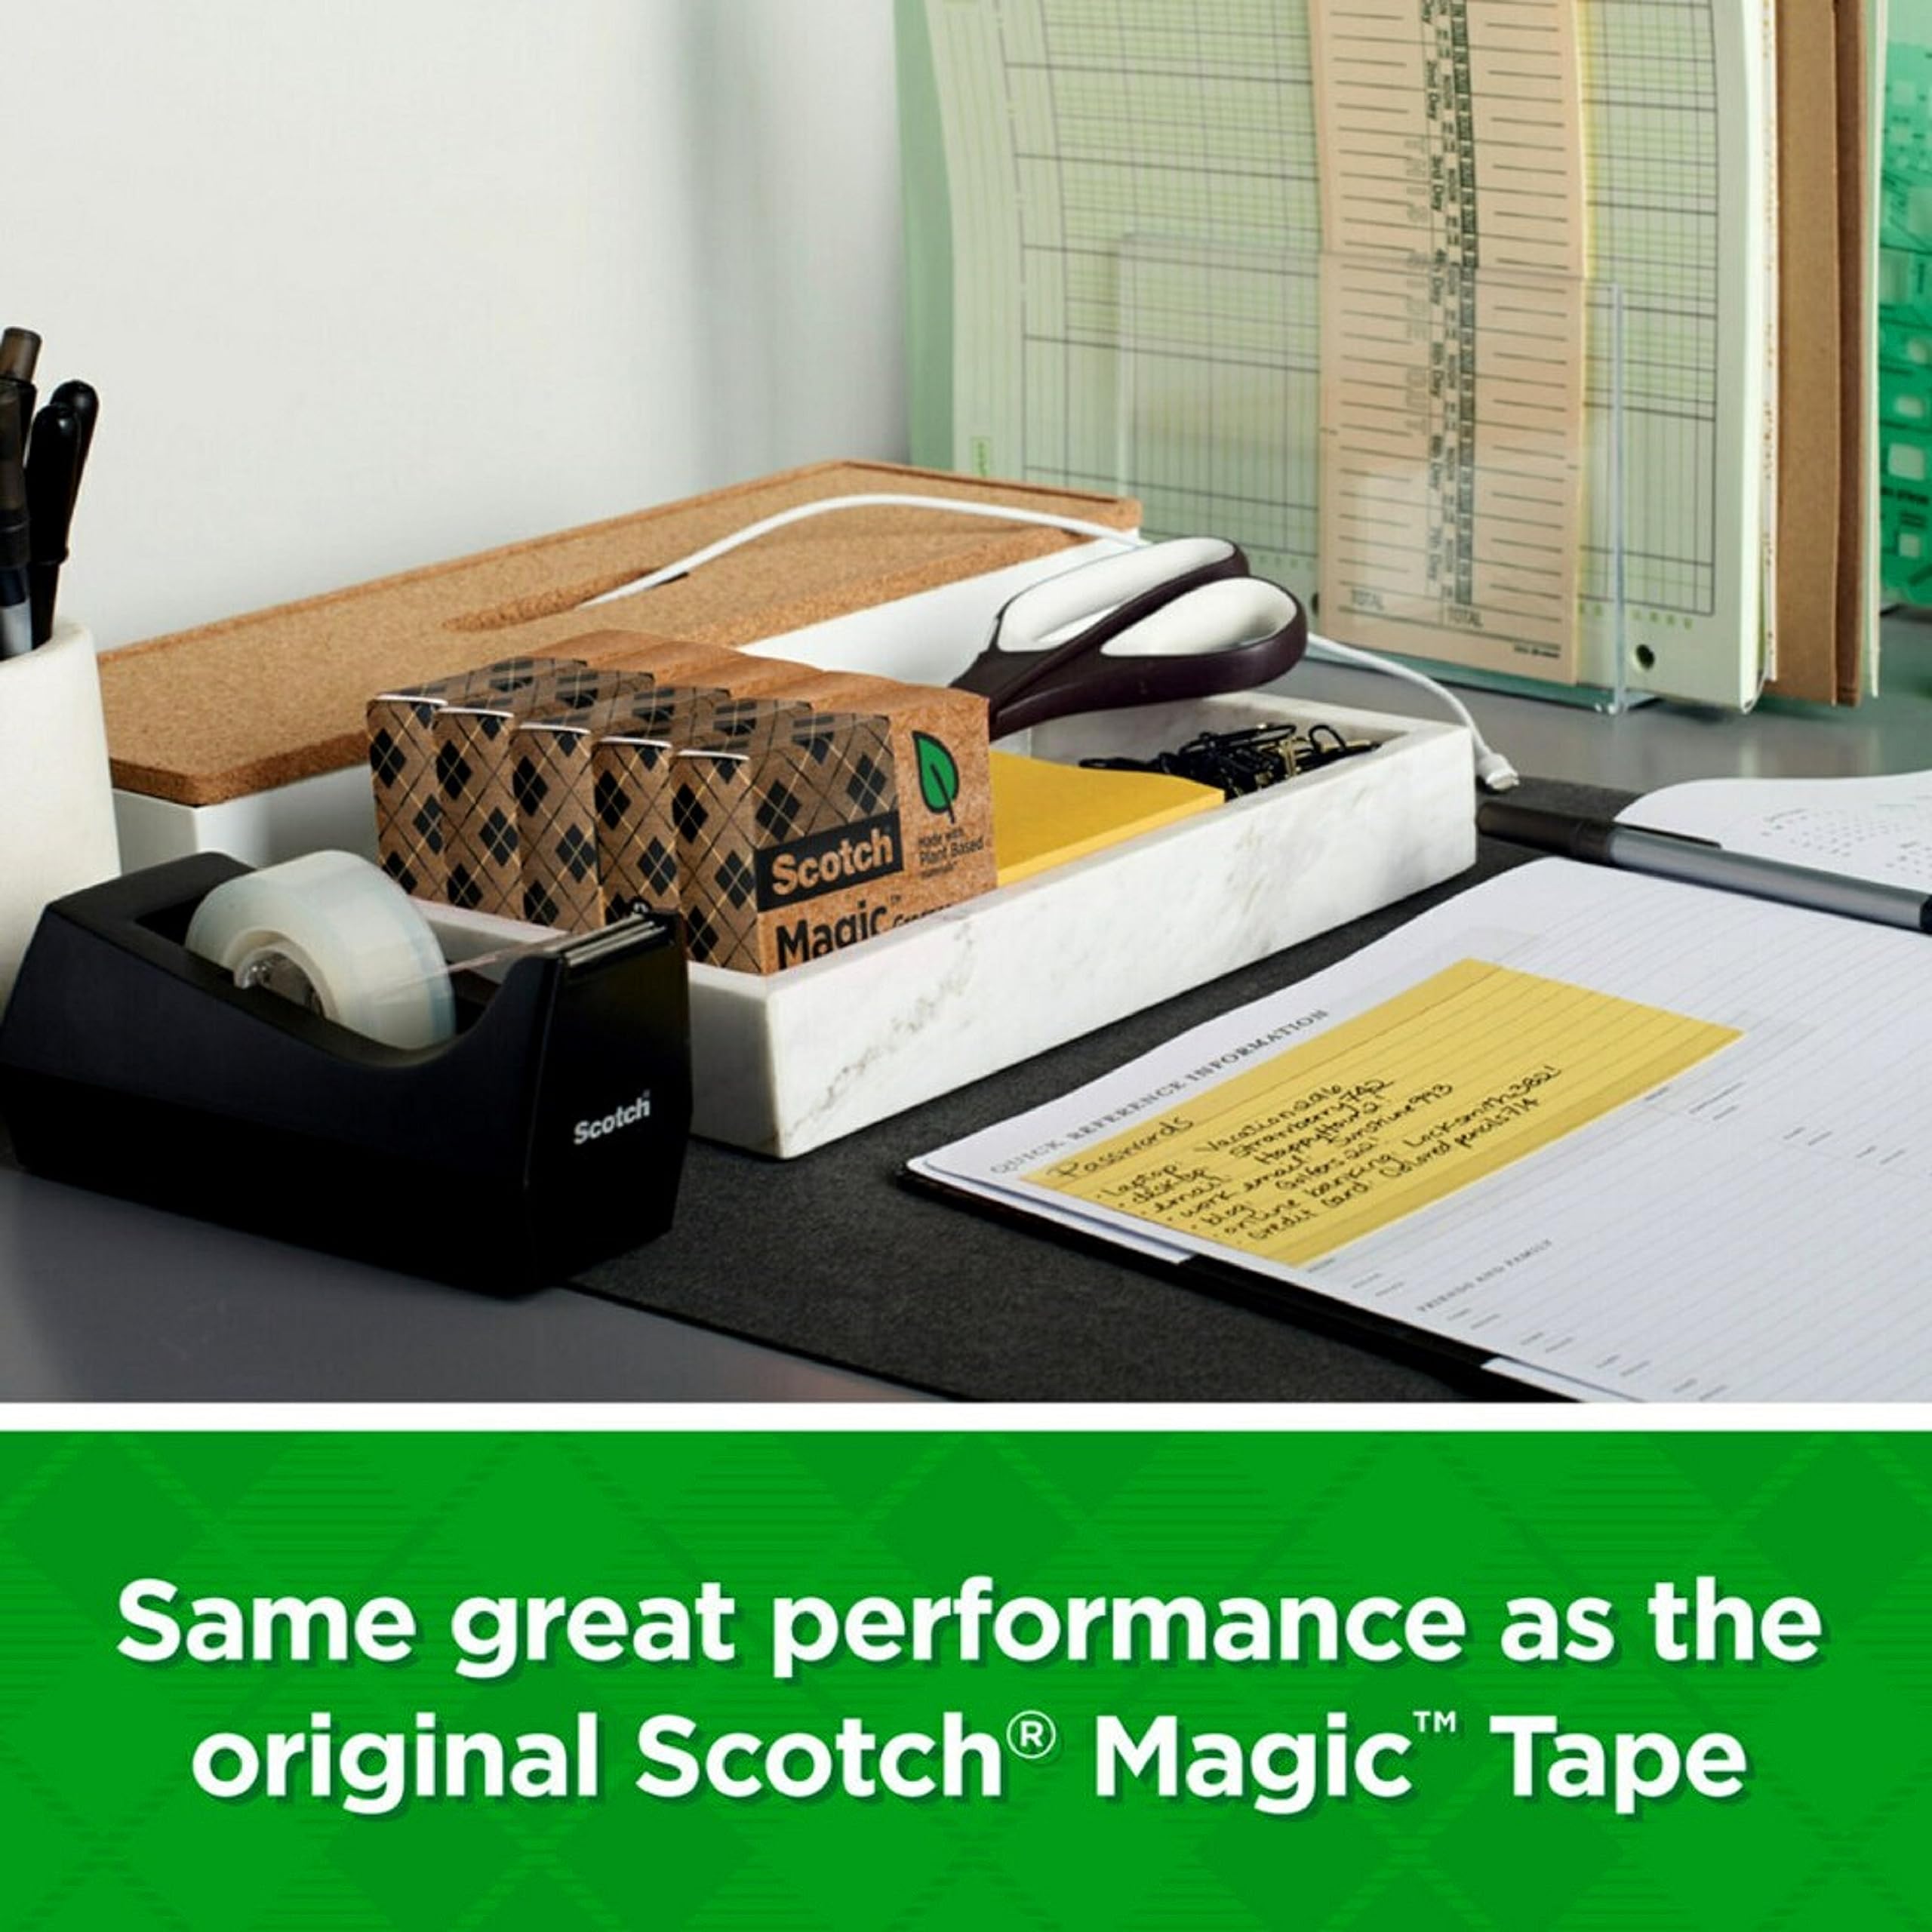 Scotch Magic Greener Tape, Invisible Tape for Fixing Paper, Office Supplies and Back to School Supplies, 0.75 in .x 900 in., 12 Rolls